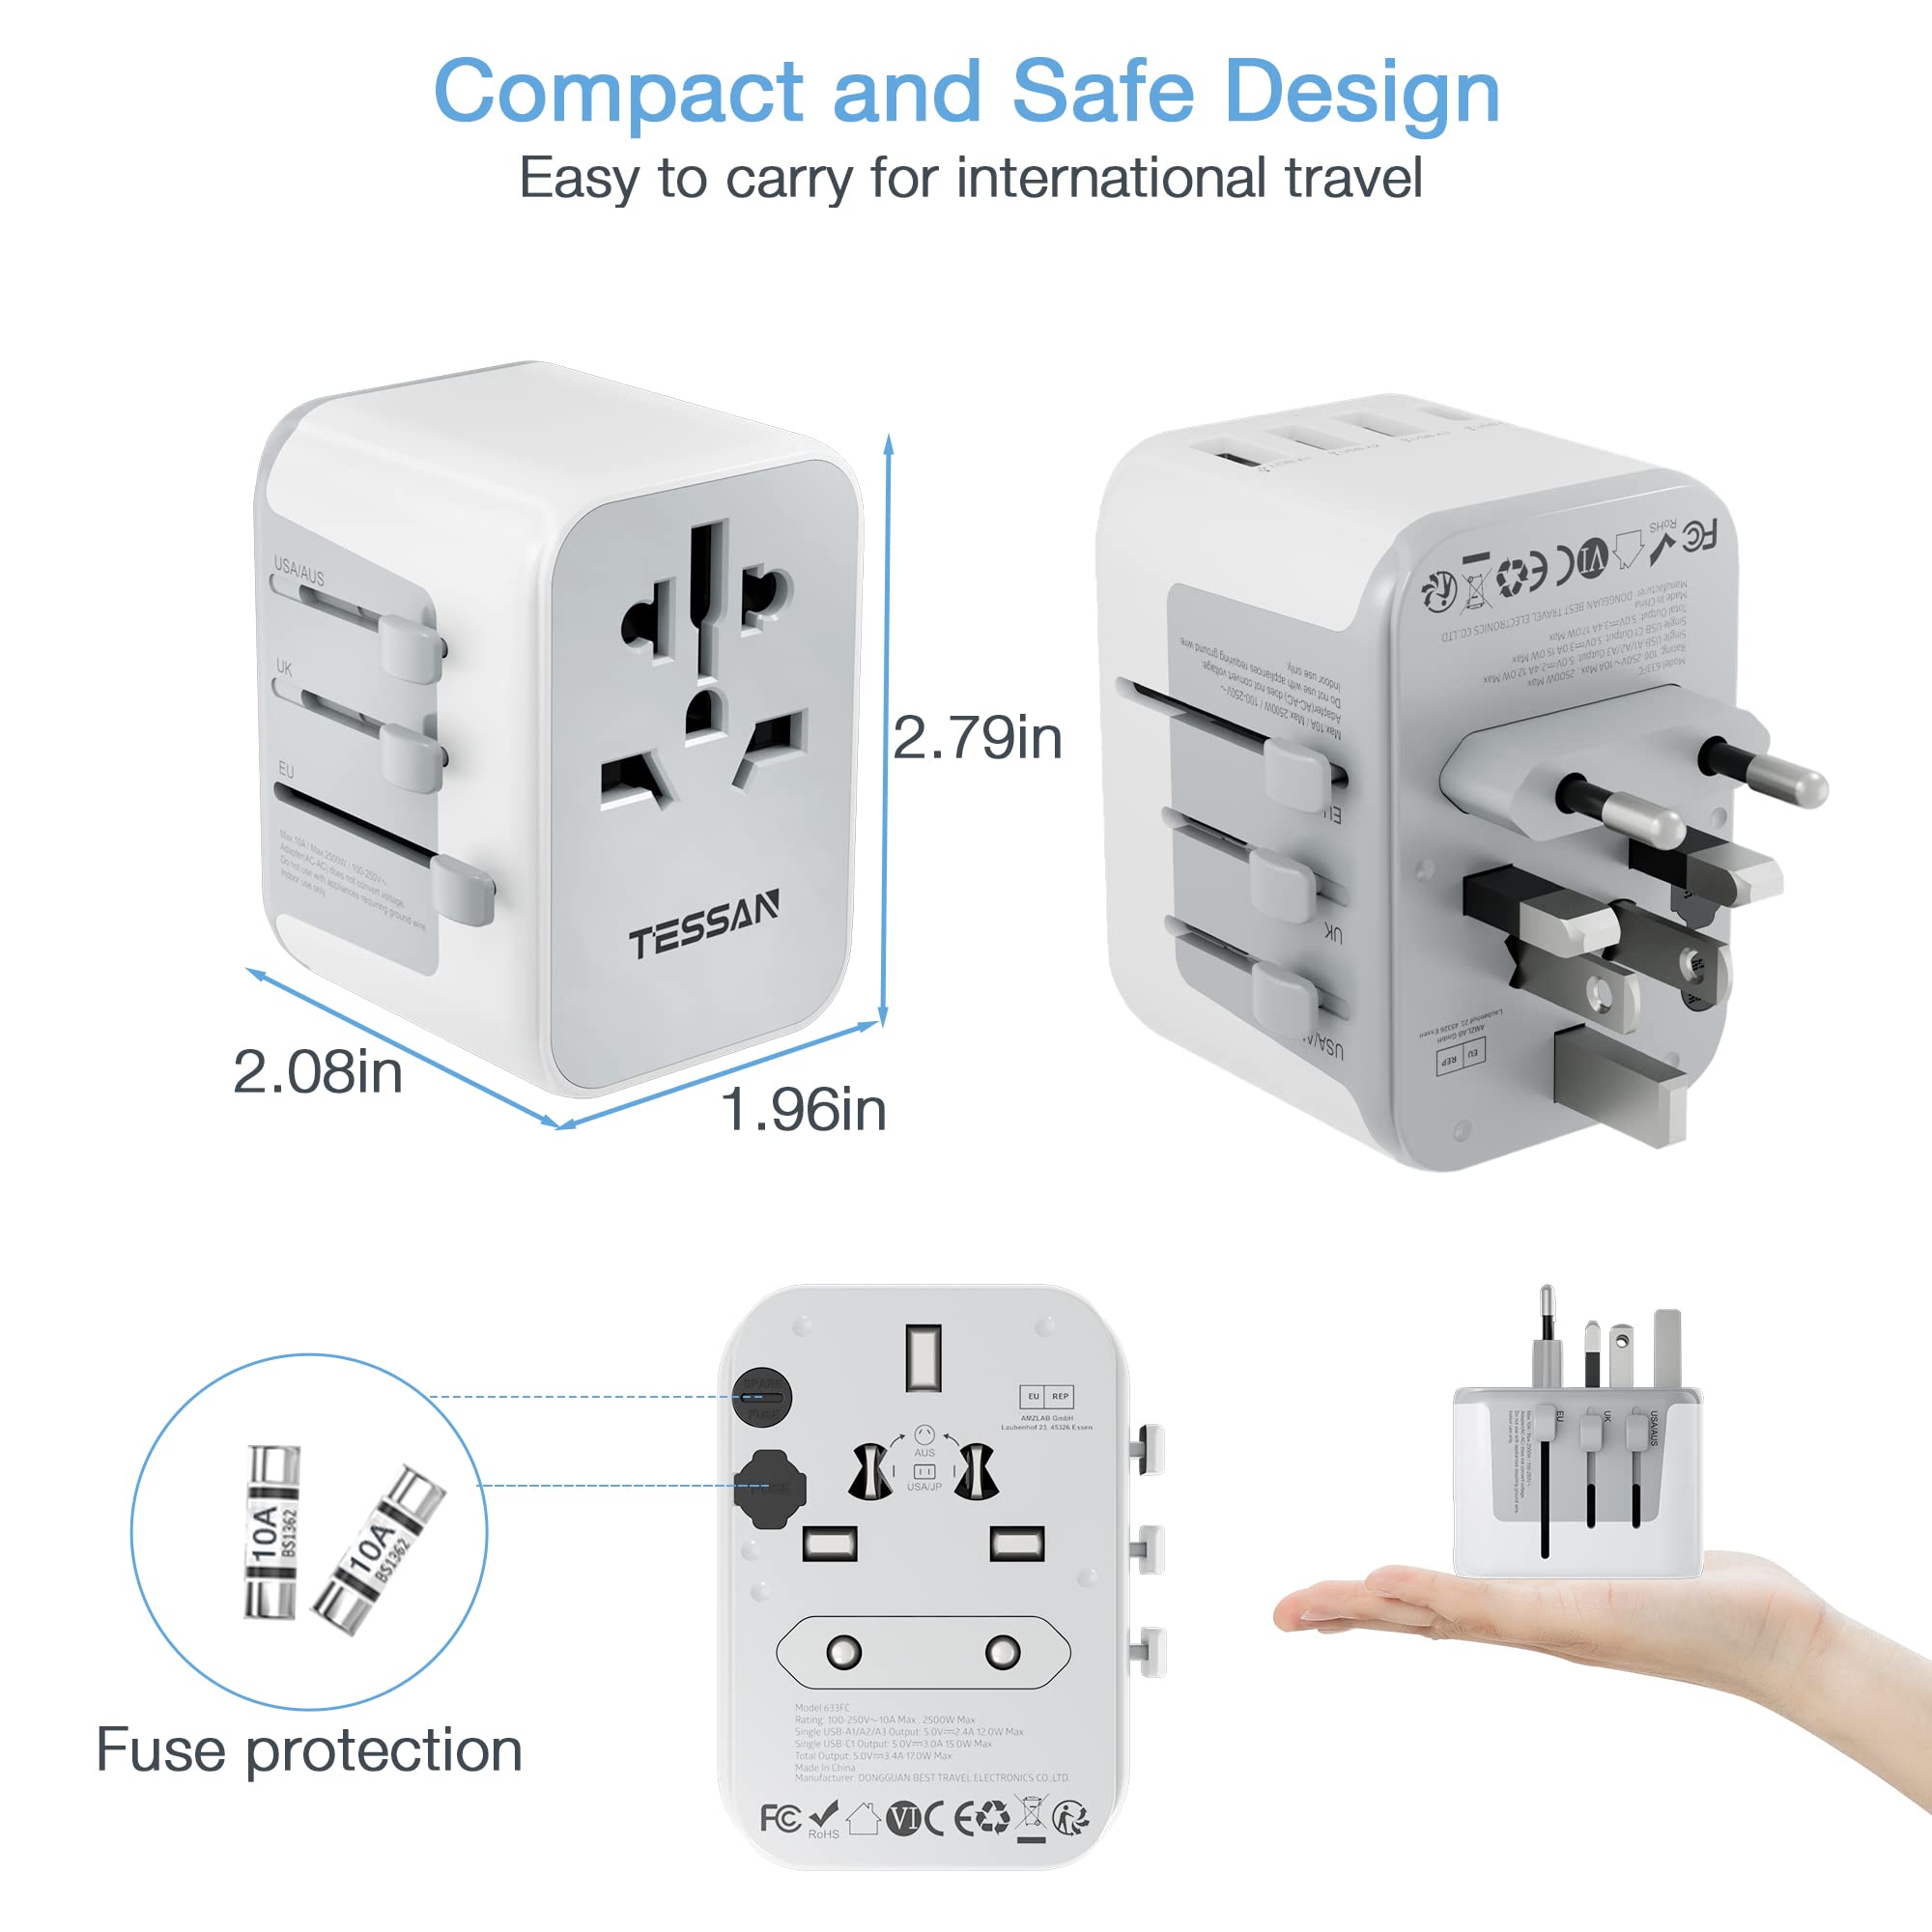 TESSAN Universal Power Adapter, International Plug Adaptor with 4 USB Ports (1 USB C), Travel Worldwide Essentials Wall Charger for US to Europe Germany France Spain Ireland Australia(Type C/G/A/I)